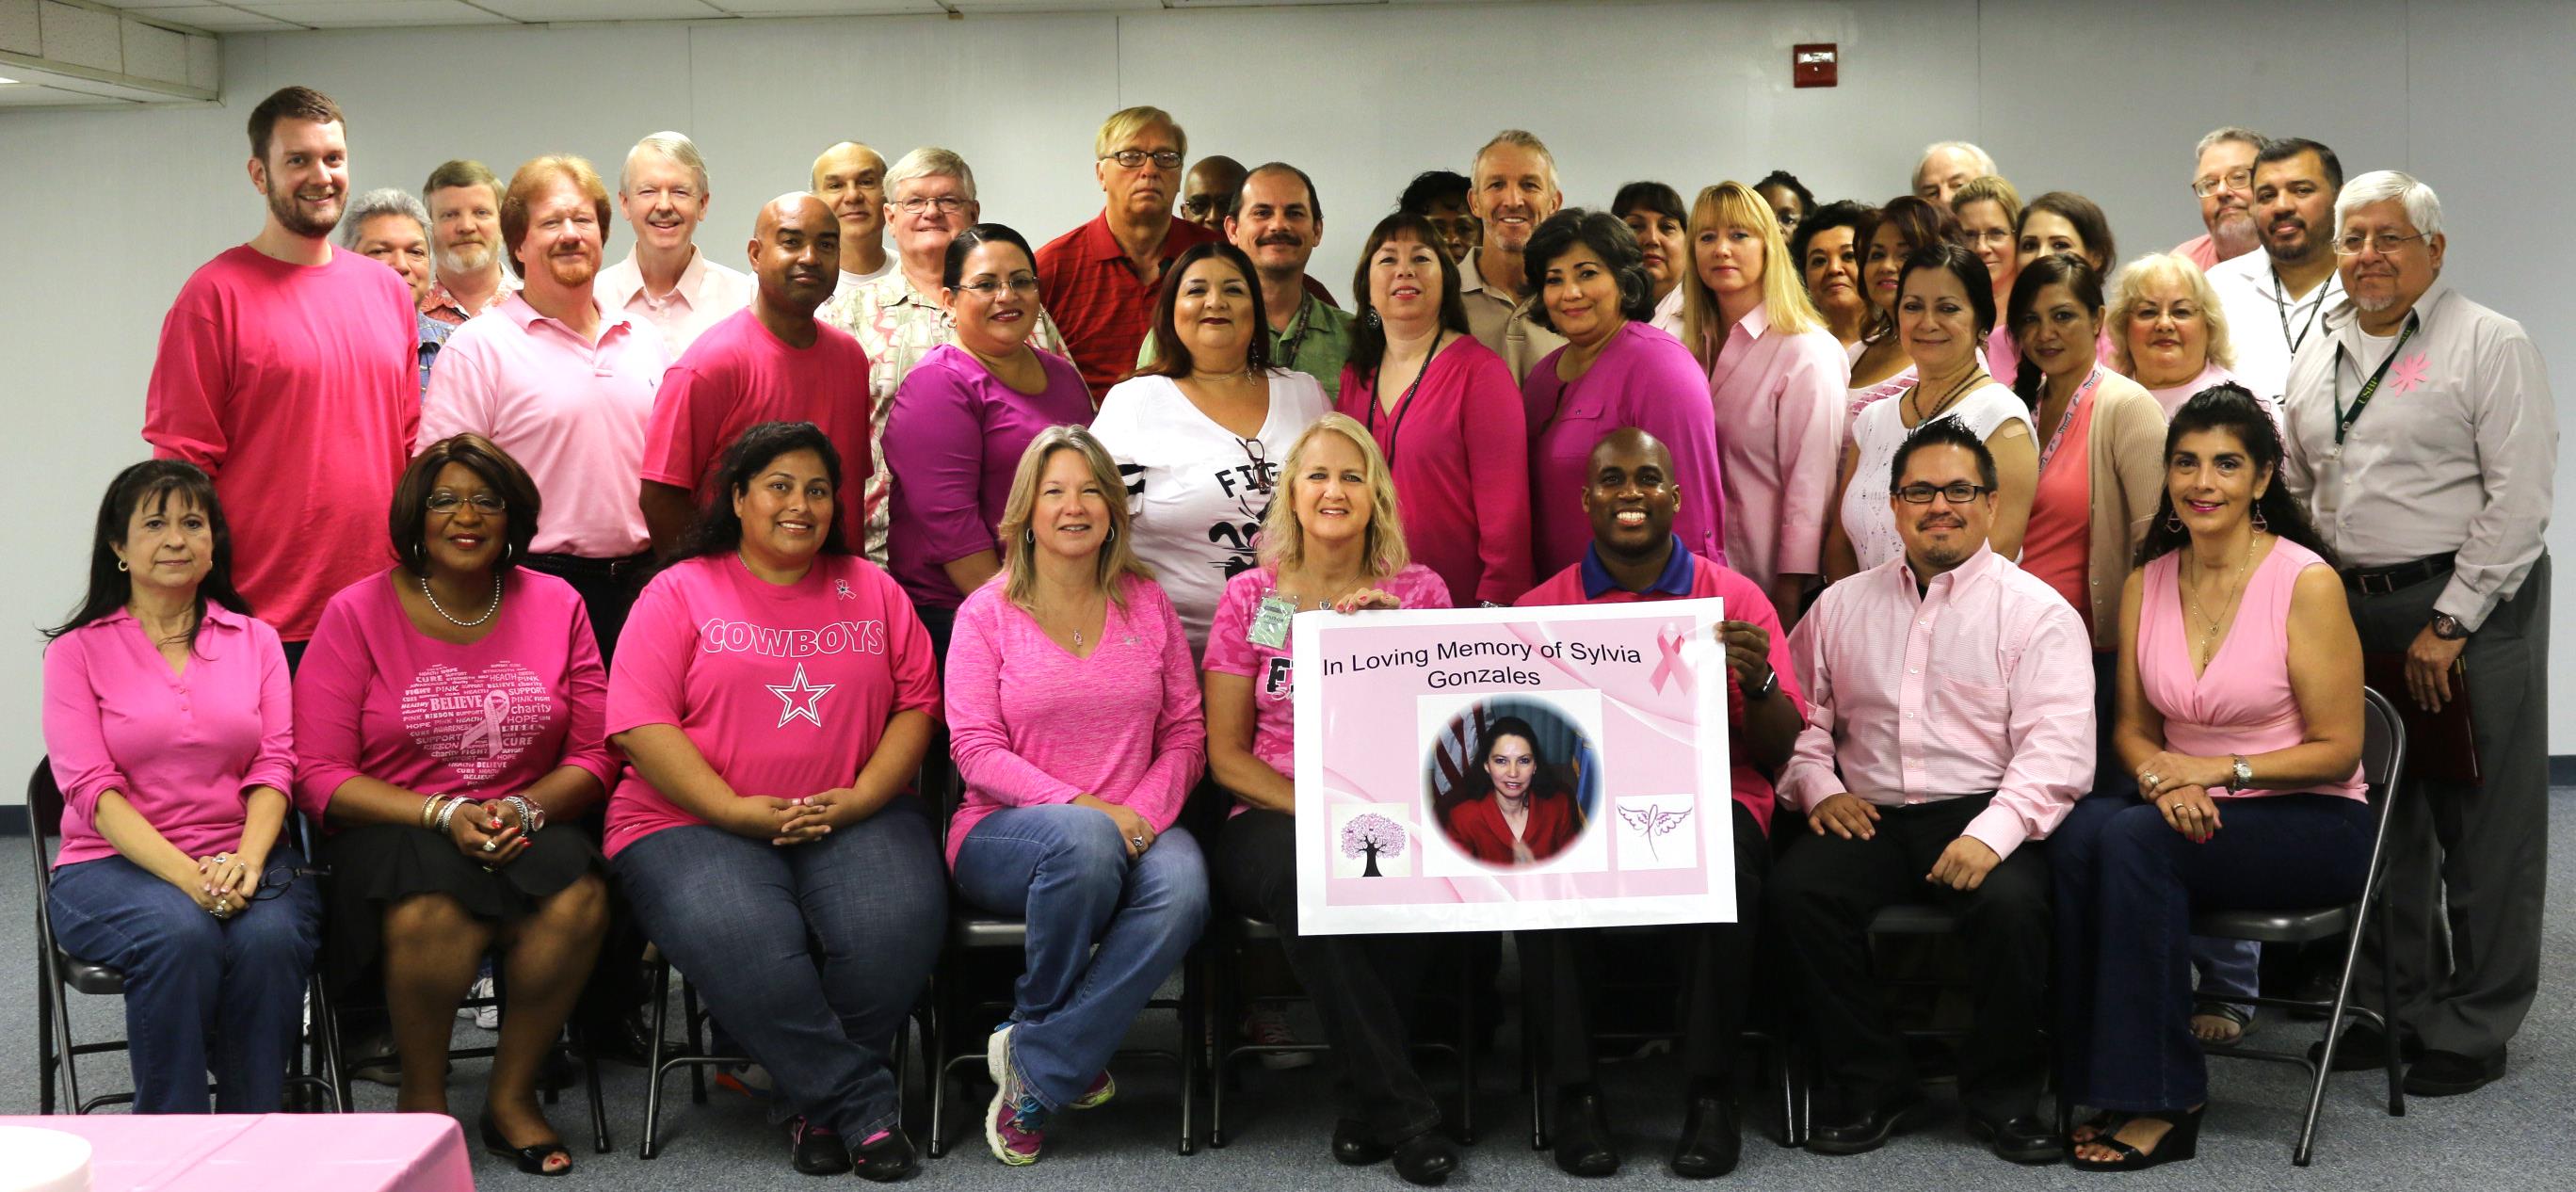 Mon Health Equipment and Supplies donates to Bra Bank for breast cancer  patients, WV News